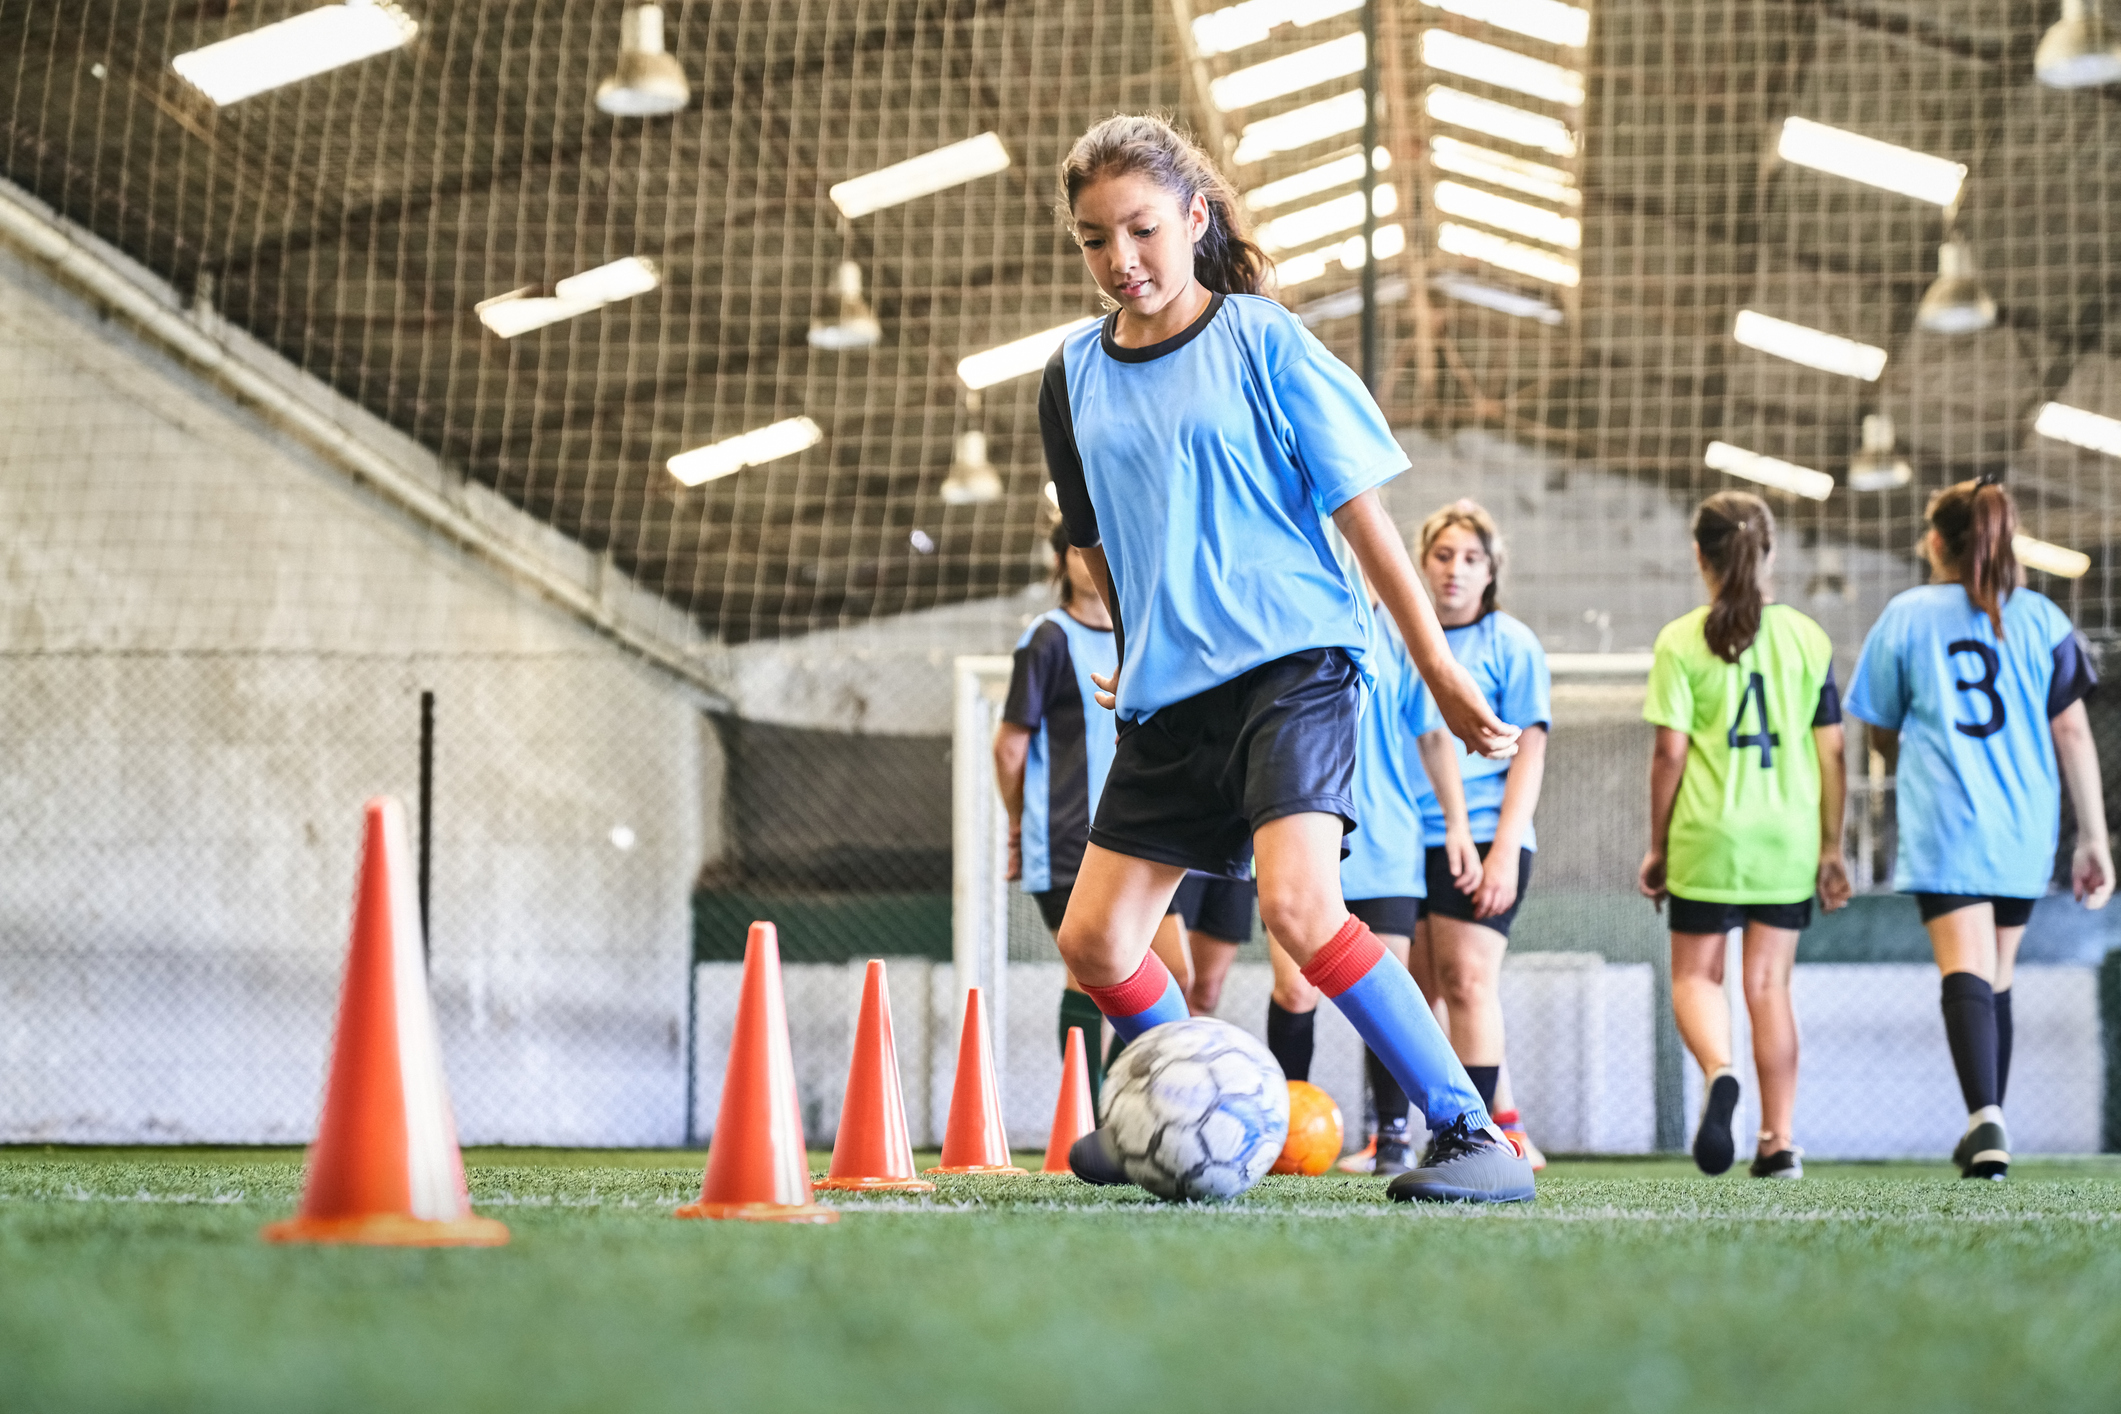 Unleash Your Soccer Potential at Austin First Touch Soccer Academy